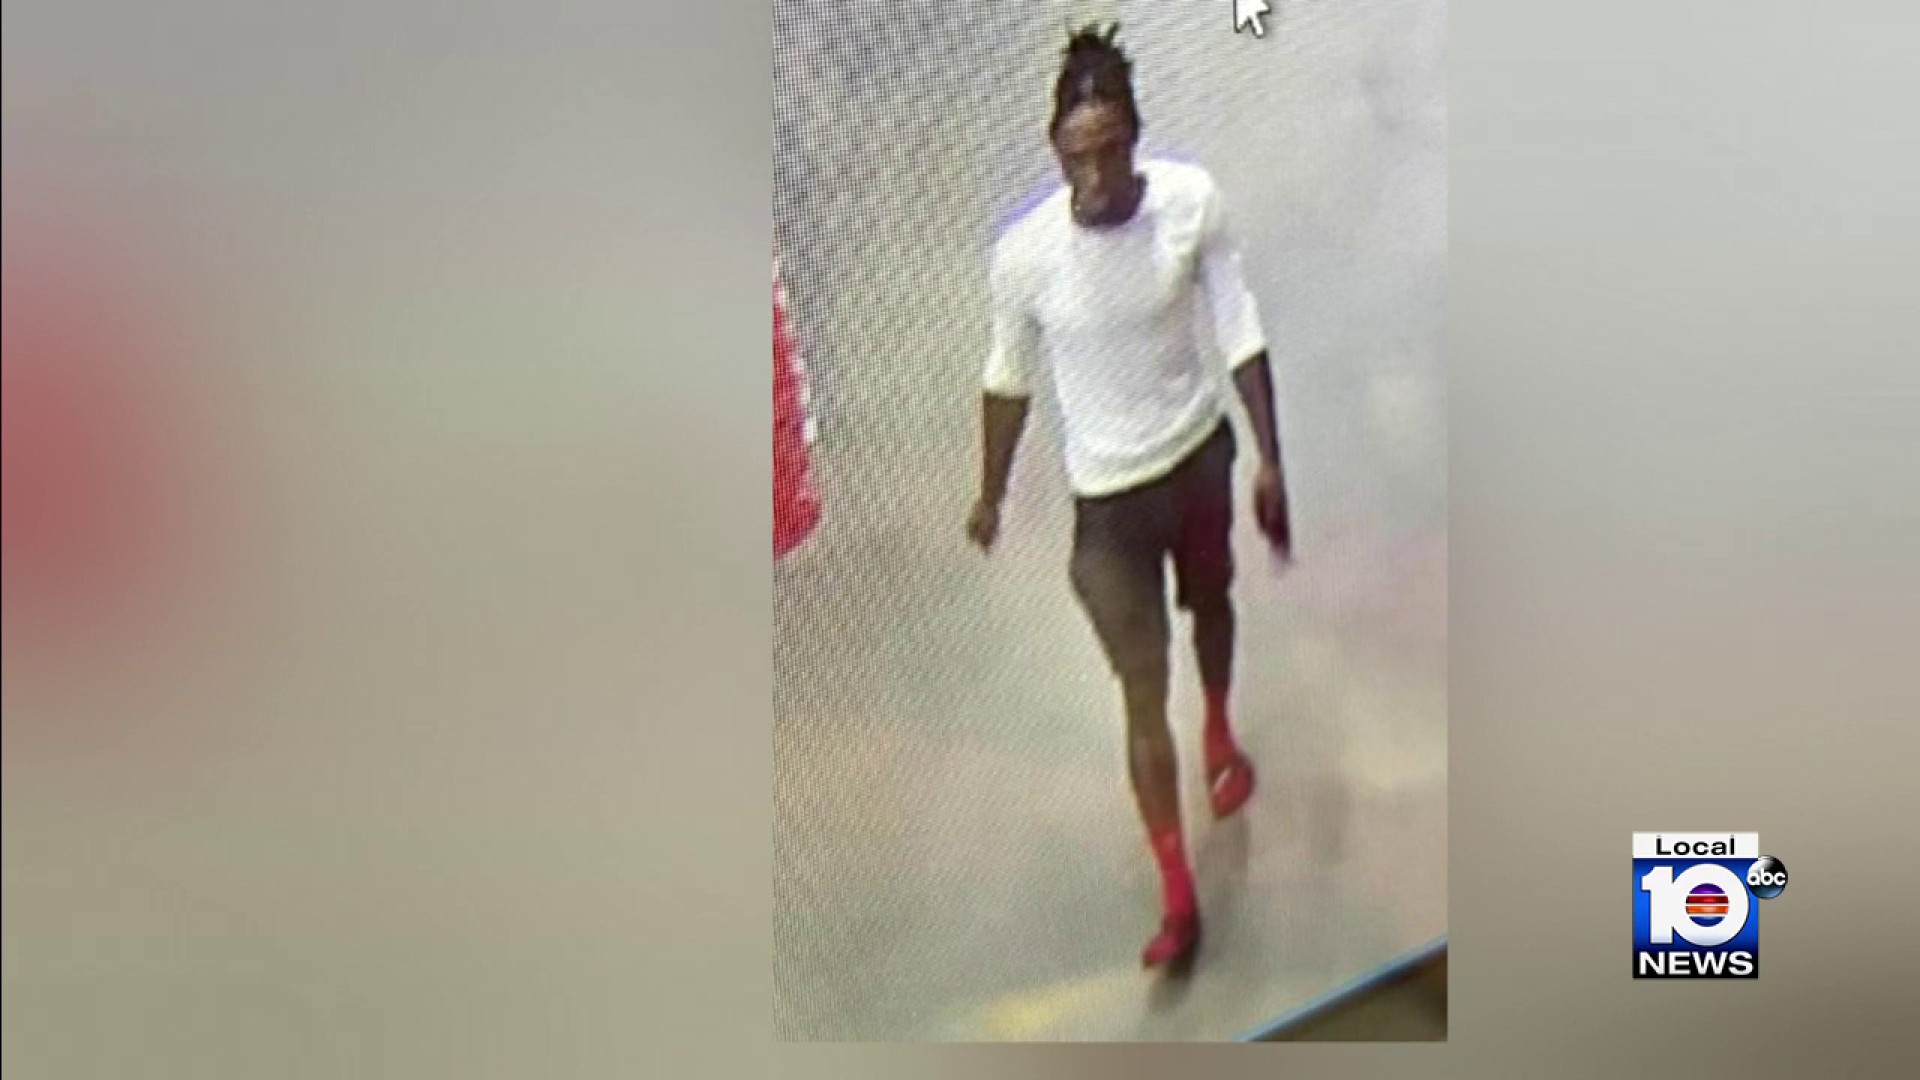 Authorities search for voyeur who took photos of men in bathroom stalls at Home Depot in Broward